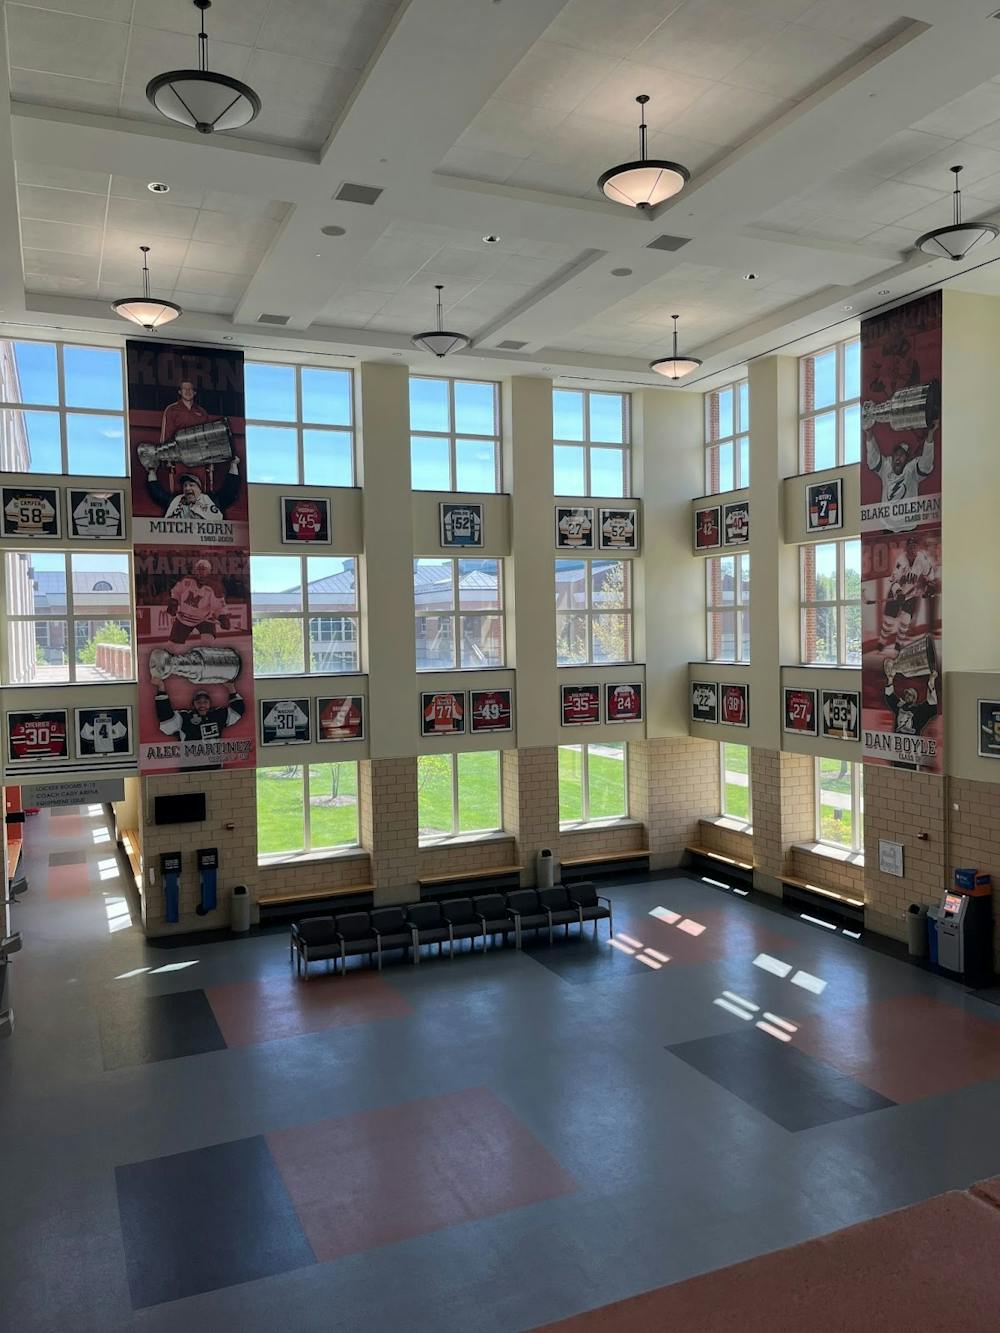 Upon entering the Goggin Ice Center, fans are greeted with the National Hockey League jerseys of former Miami hockey players who have gone on to play in the NHL.